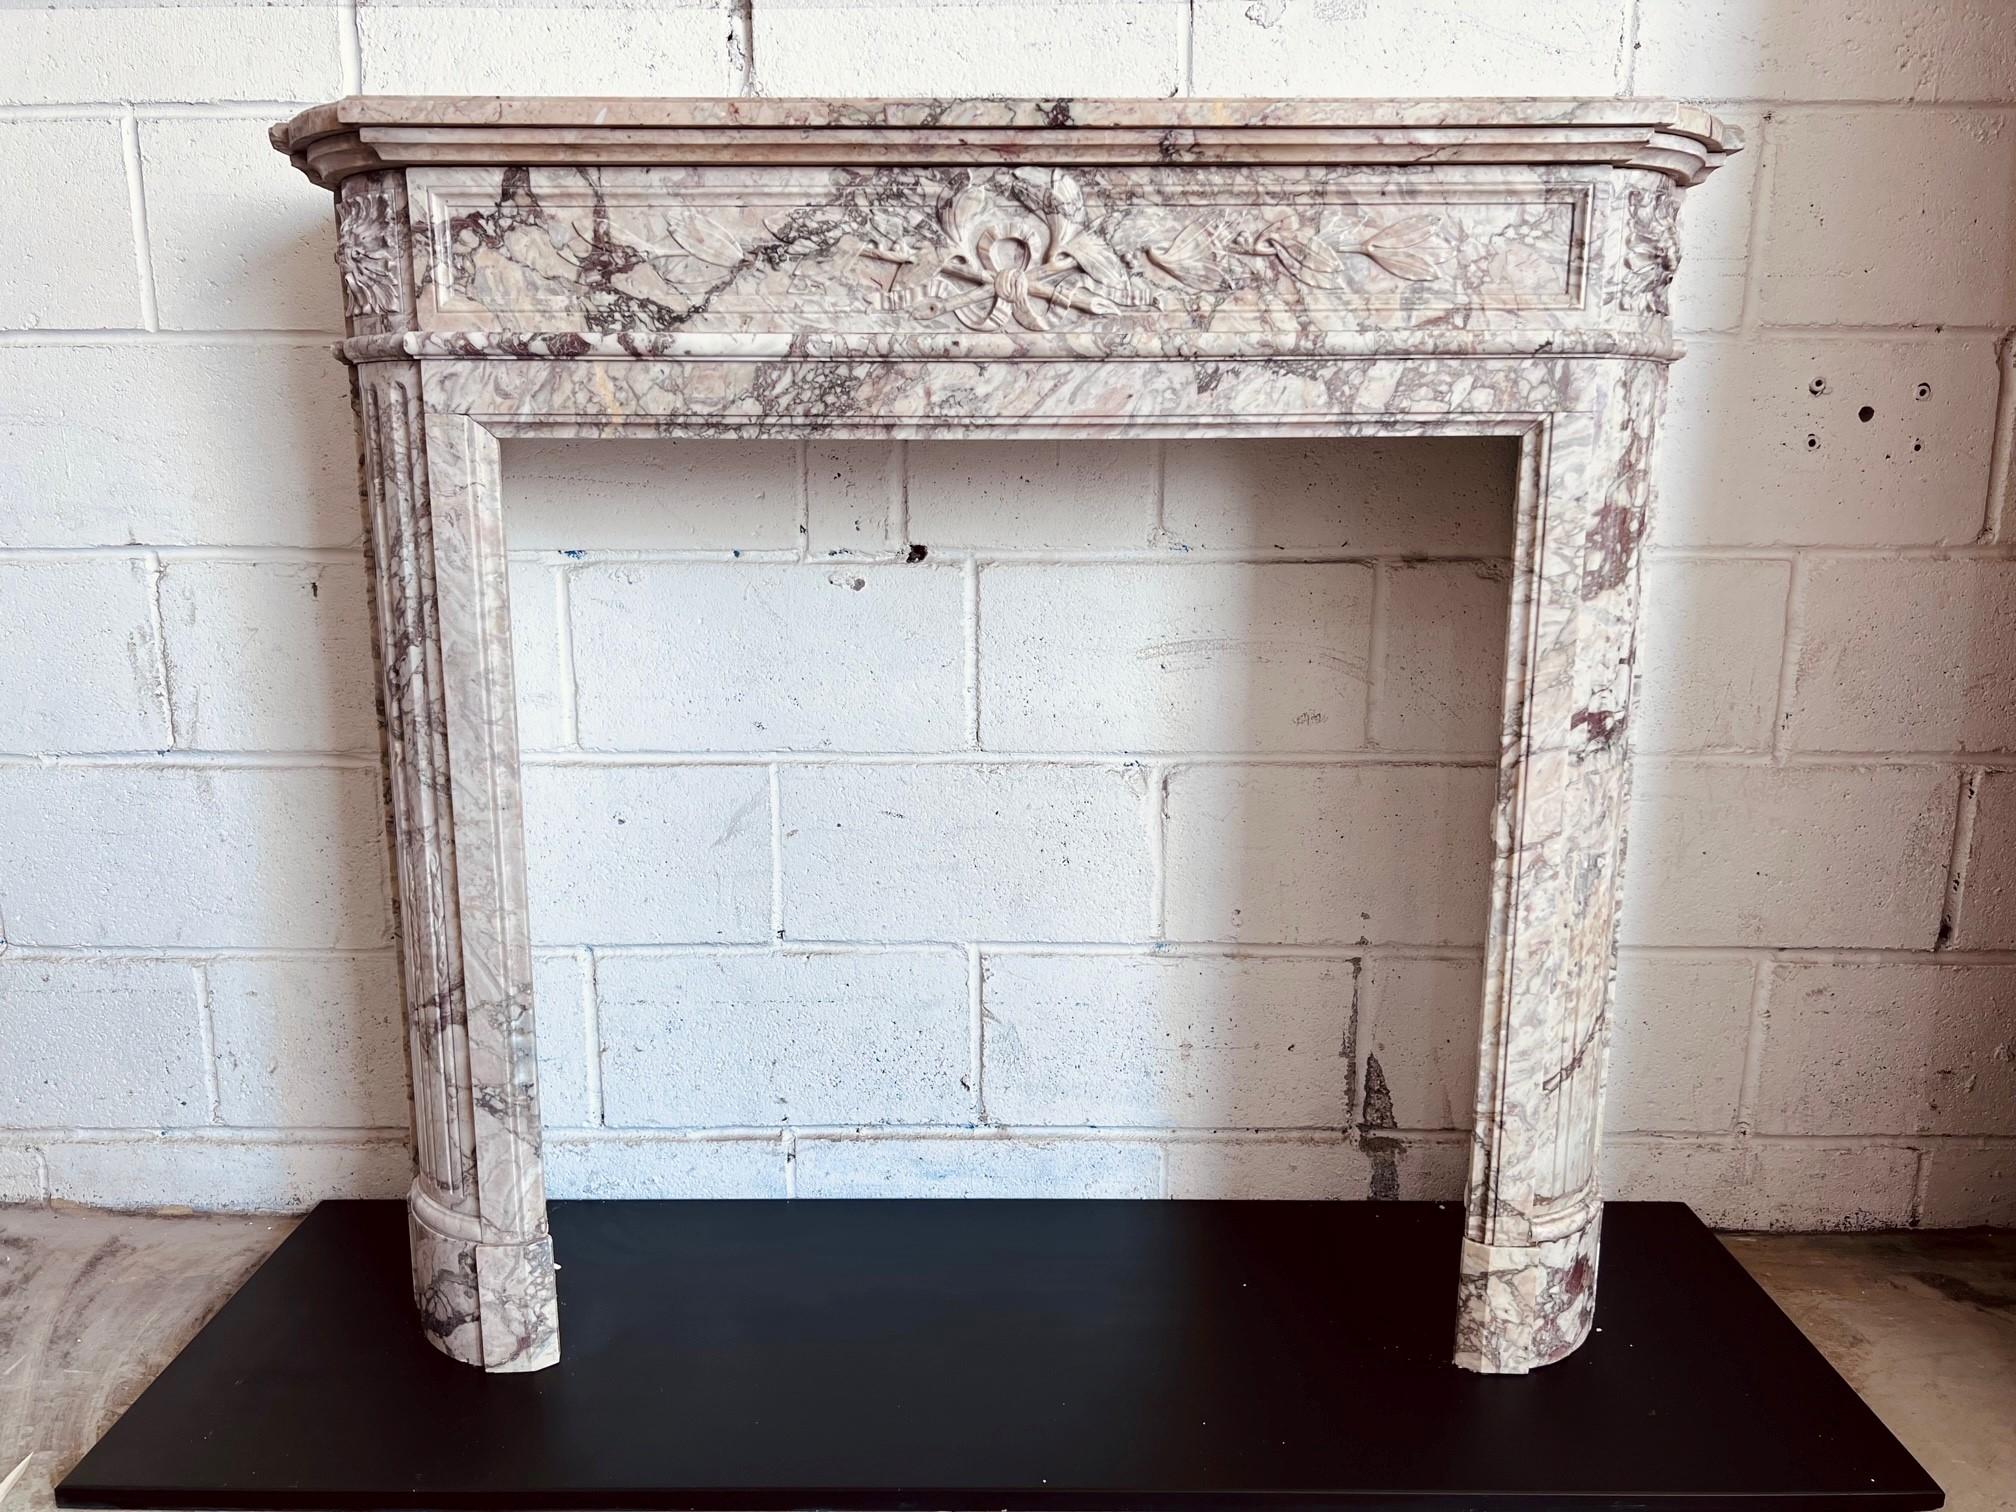 Louis XVI Style Mantel in Breccia Rosa Marble with wreath and ribbon carving detail and rosette corner blocks.
Opening Dimensions 31 5/8